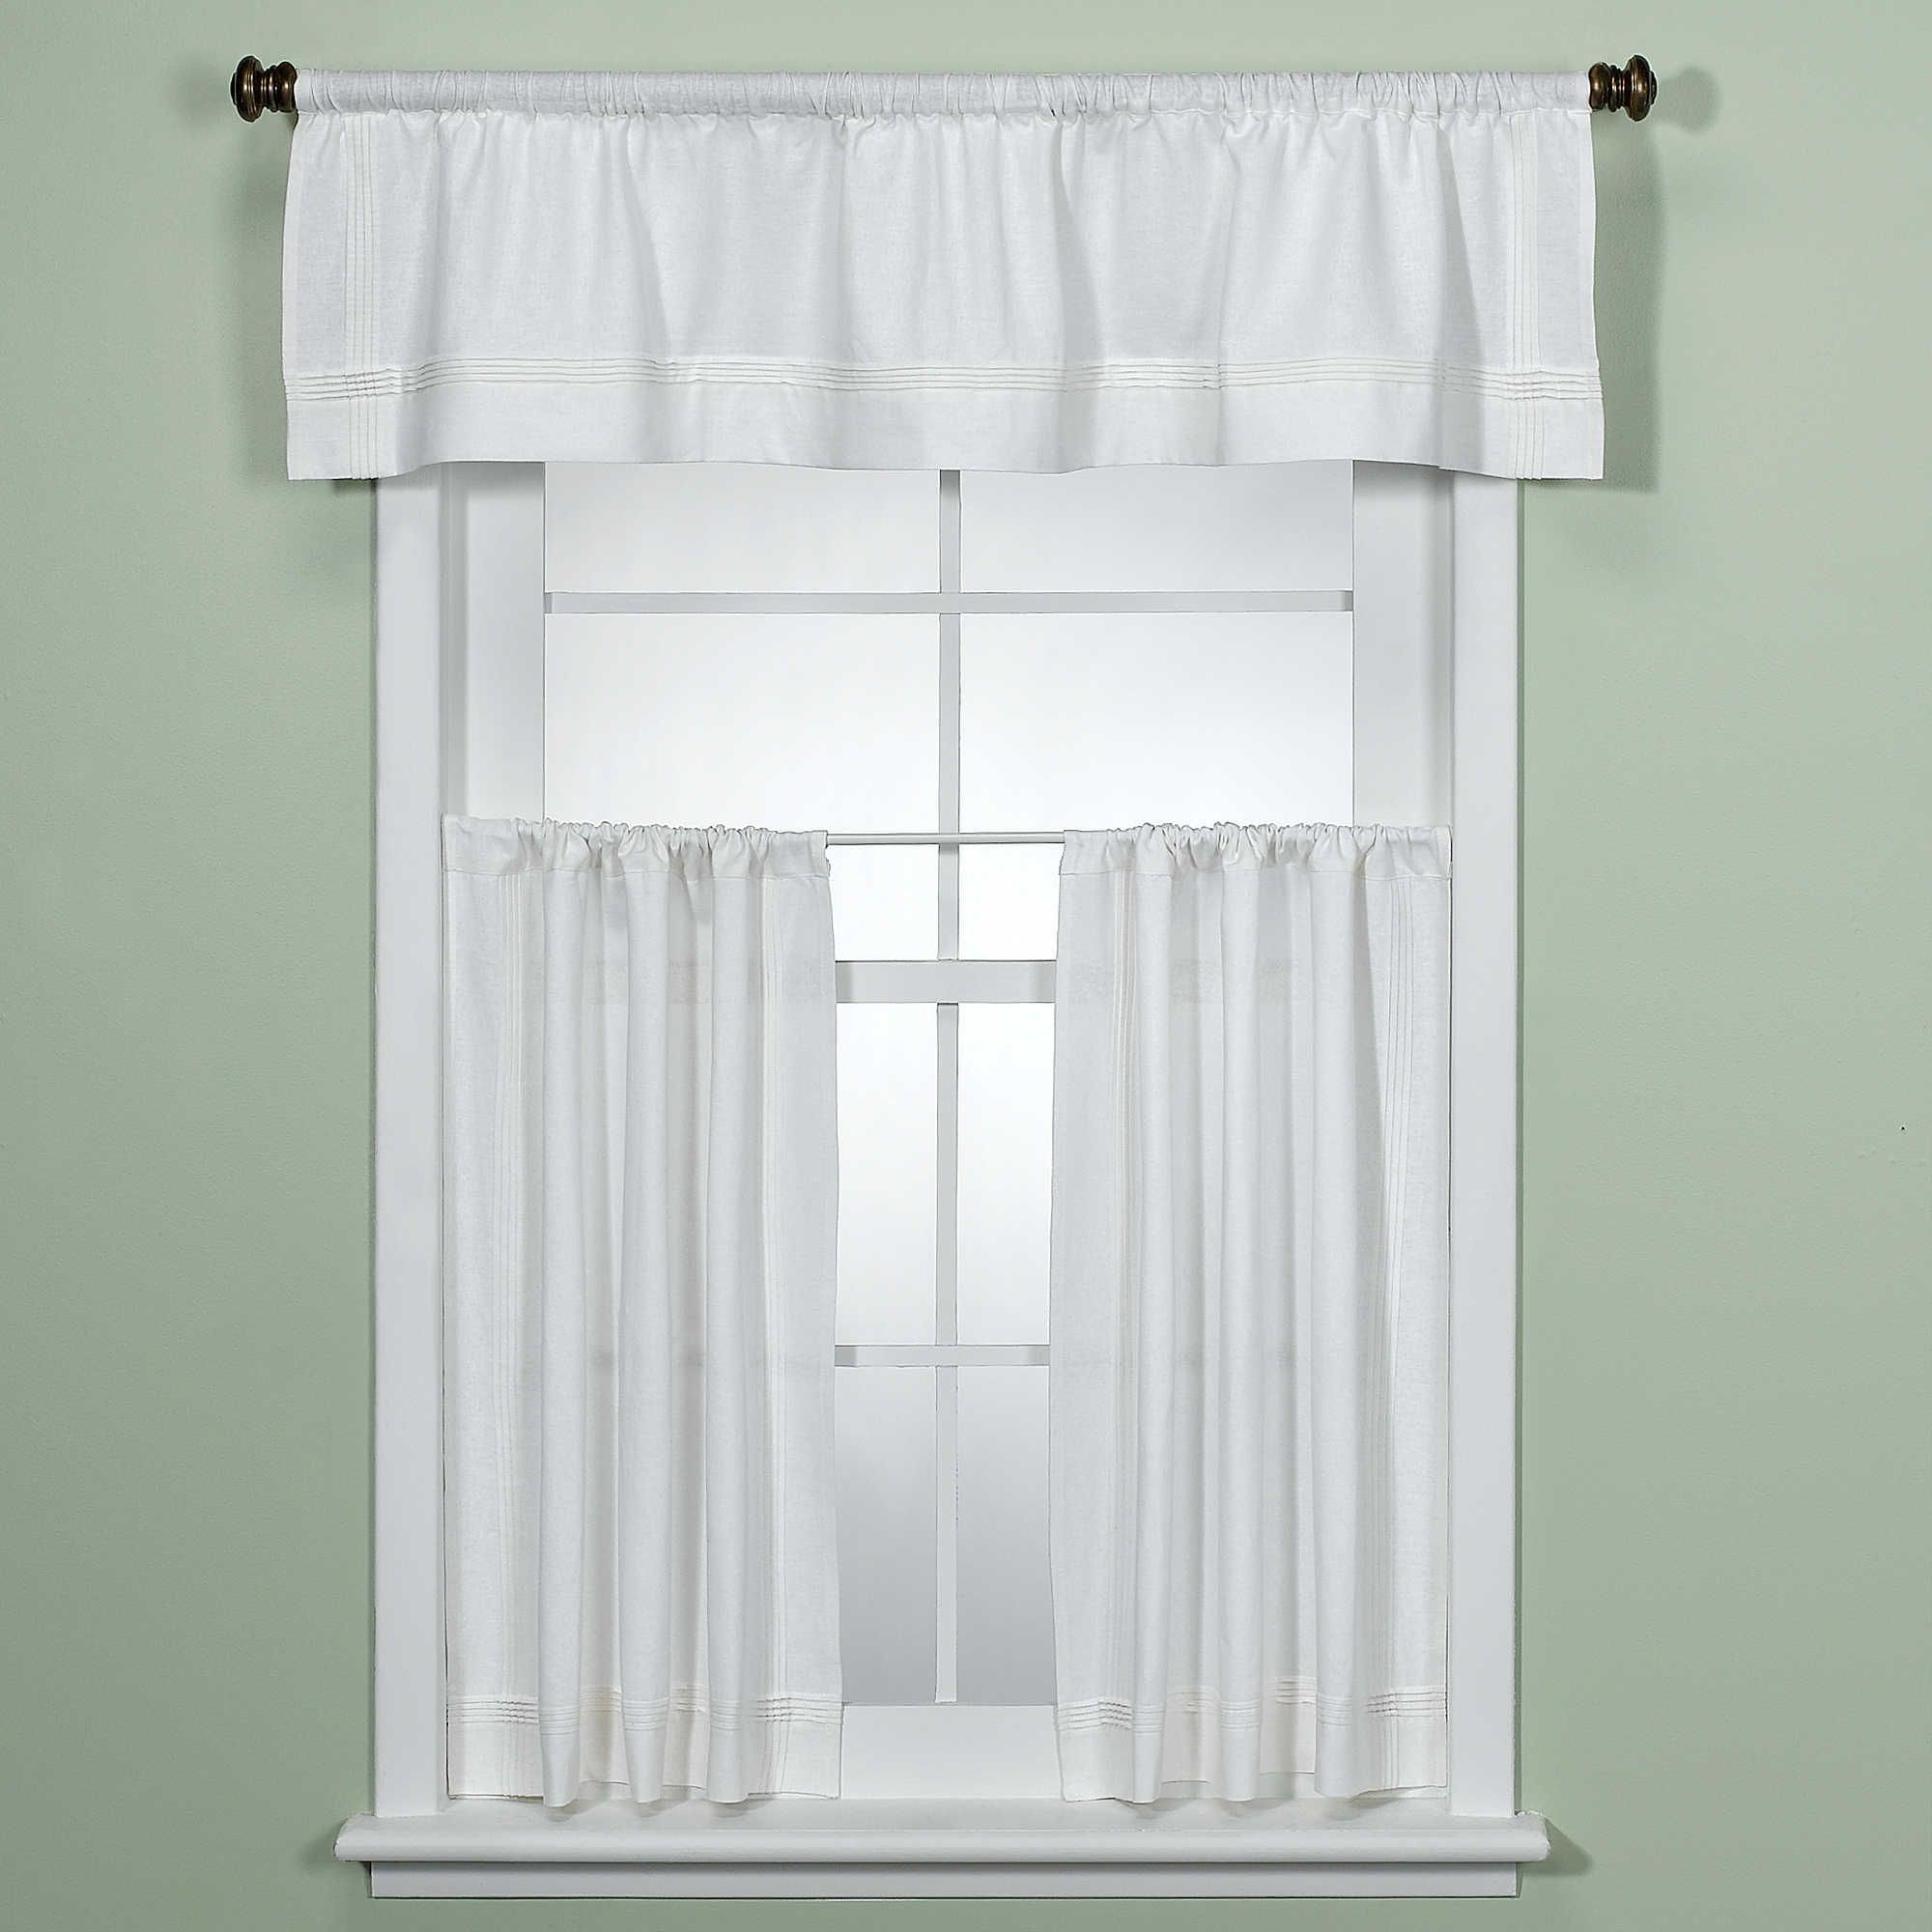 Modern Subtle Texture Solid White Kitchen Curtain Parts With For Modern Subtle Texture Solid White Kitchen Curtain Parts With Grommets Tier And Valance Options (View 9 of 20)